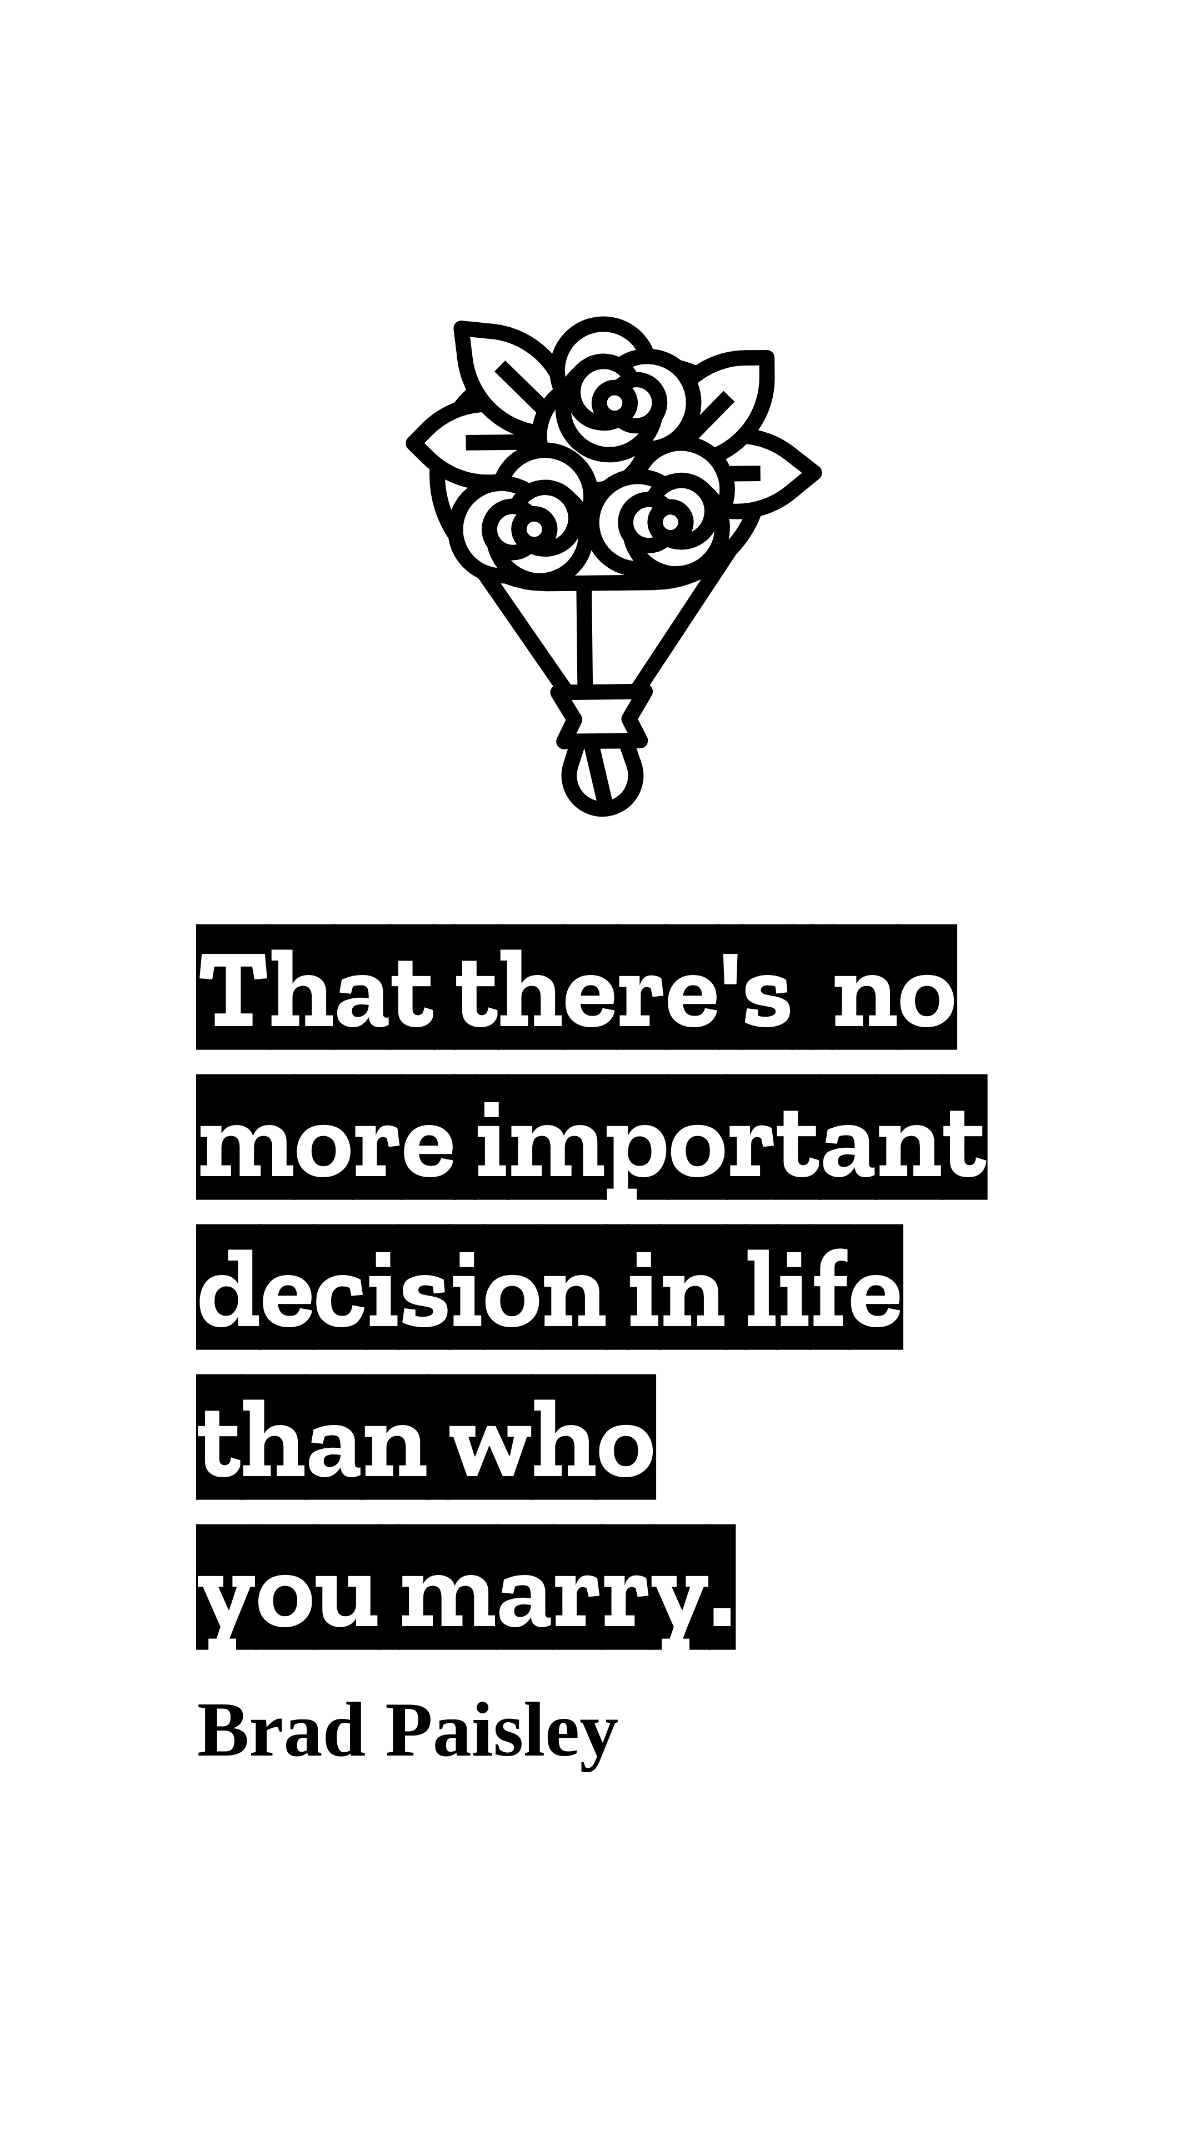 Free Brad Paisley - That there's no more important decision in life than who you marry. Template